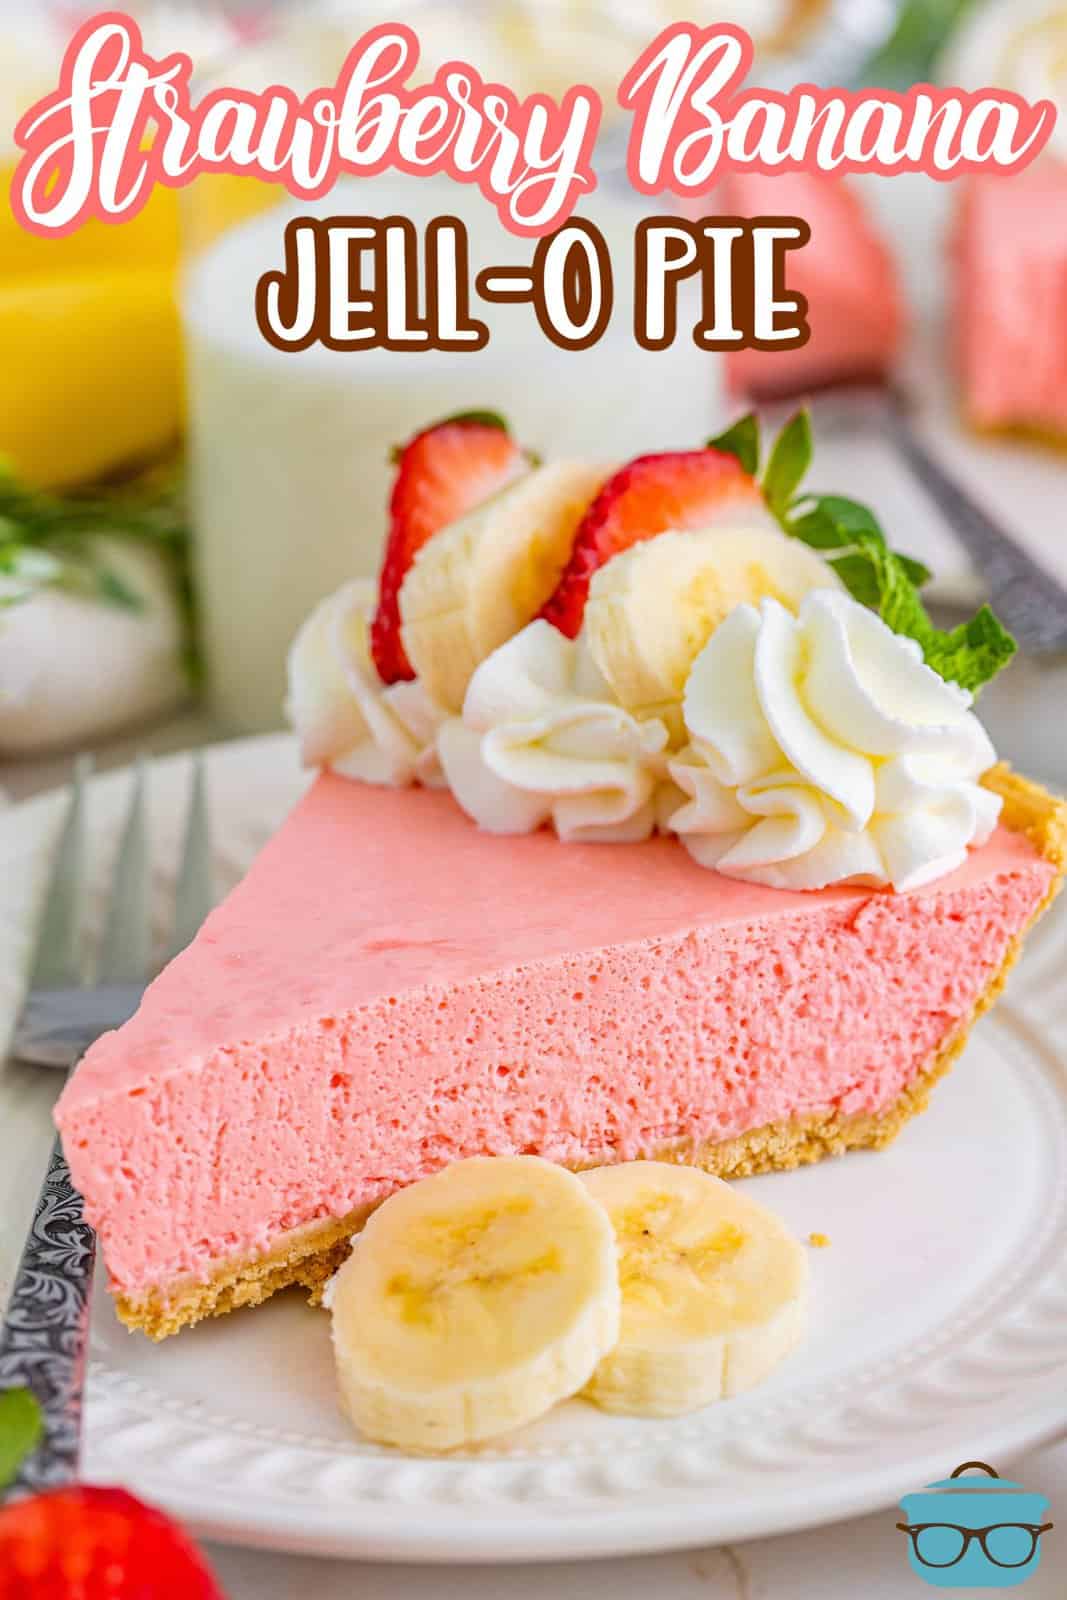 A slice of Strawberry Banana Jello Pie with garnishes on top.